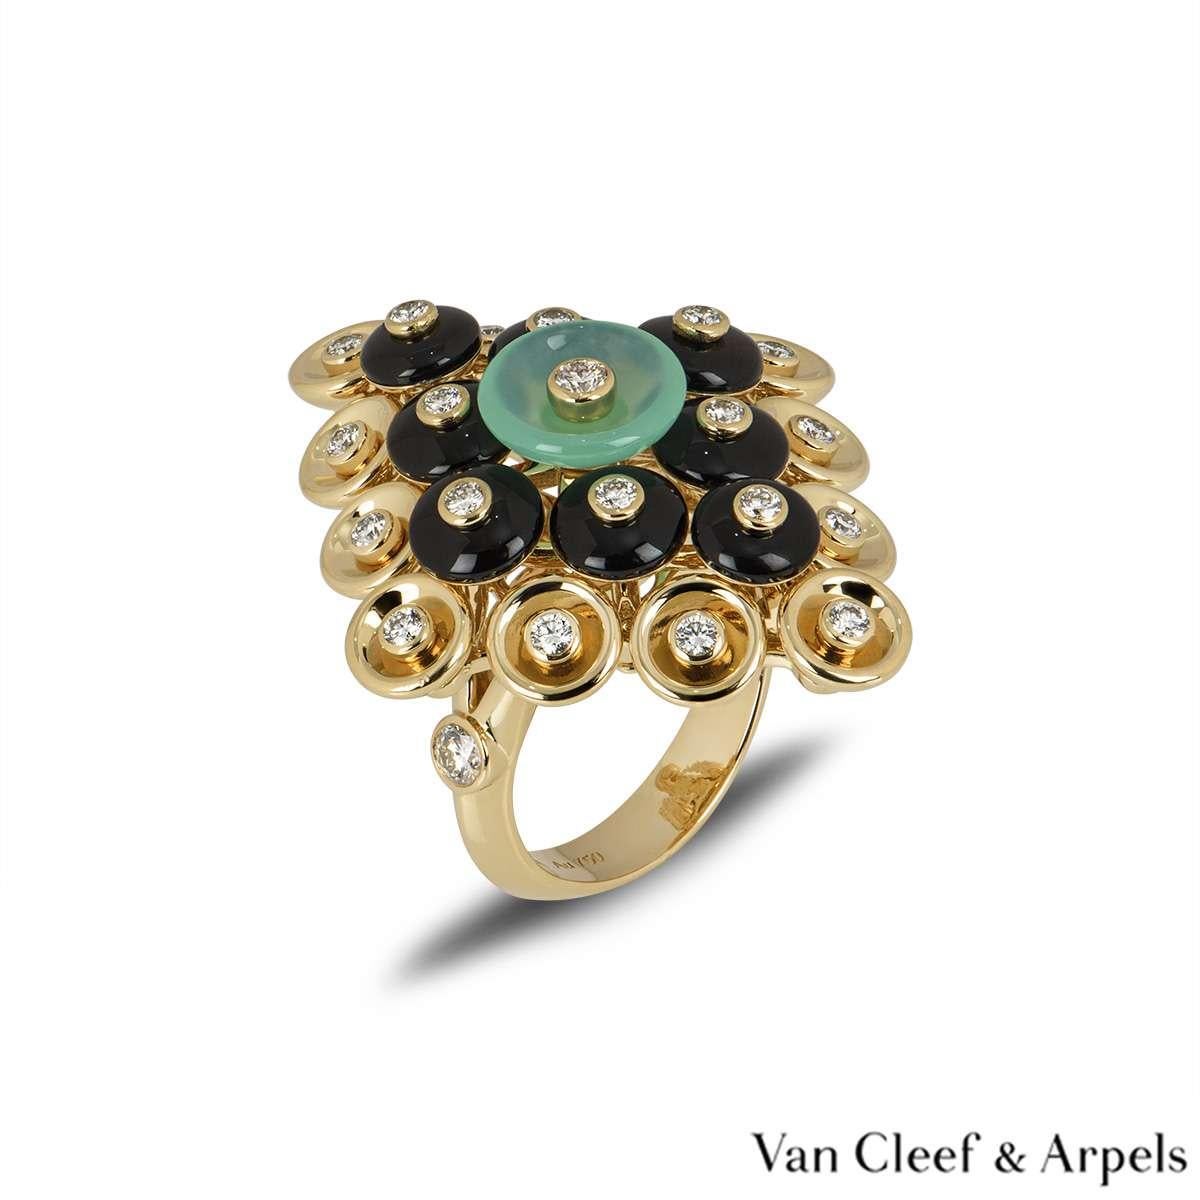 A unique dress ring from the Bouton d'or collection by Van Cleef & Arpels. The ring features a paillette design which includes diamonds, onyx and chrysoprase. The are a total of 23 diamonds totalling 0.68ct. The ring measures 2.8cm in width and